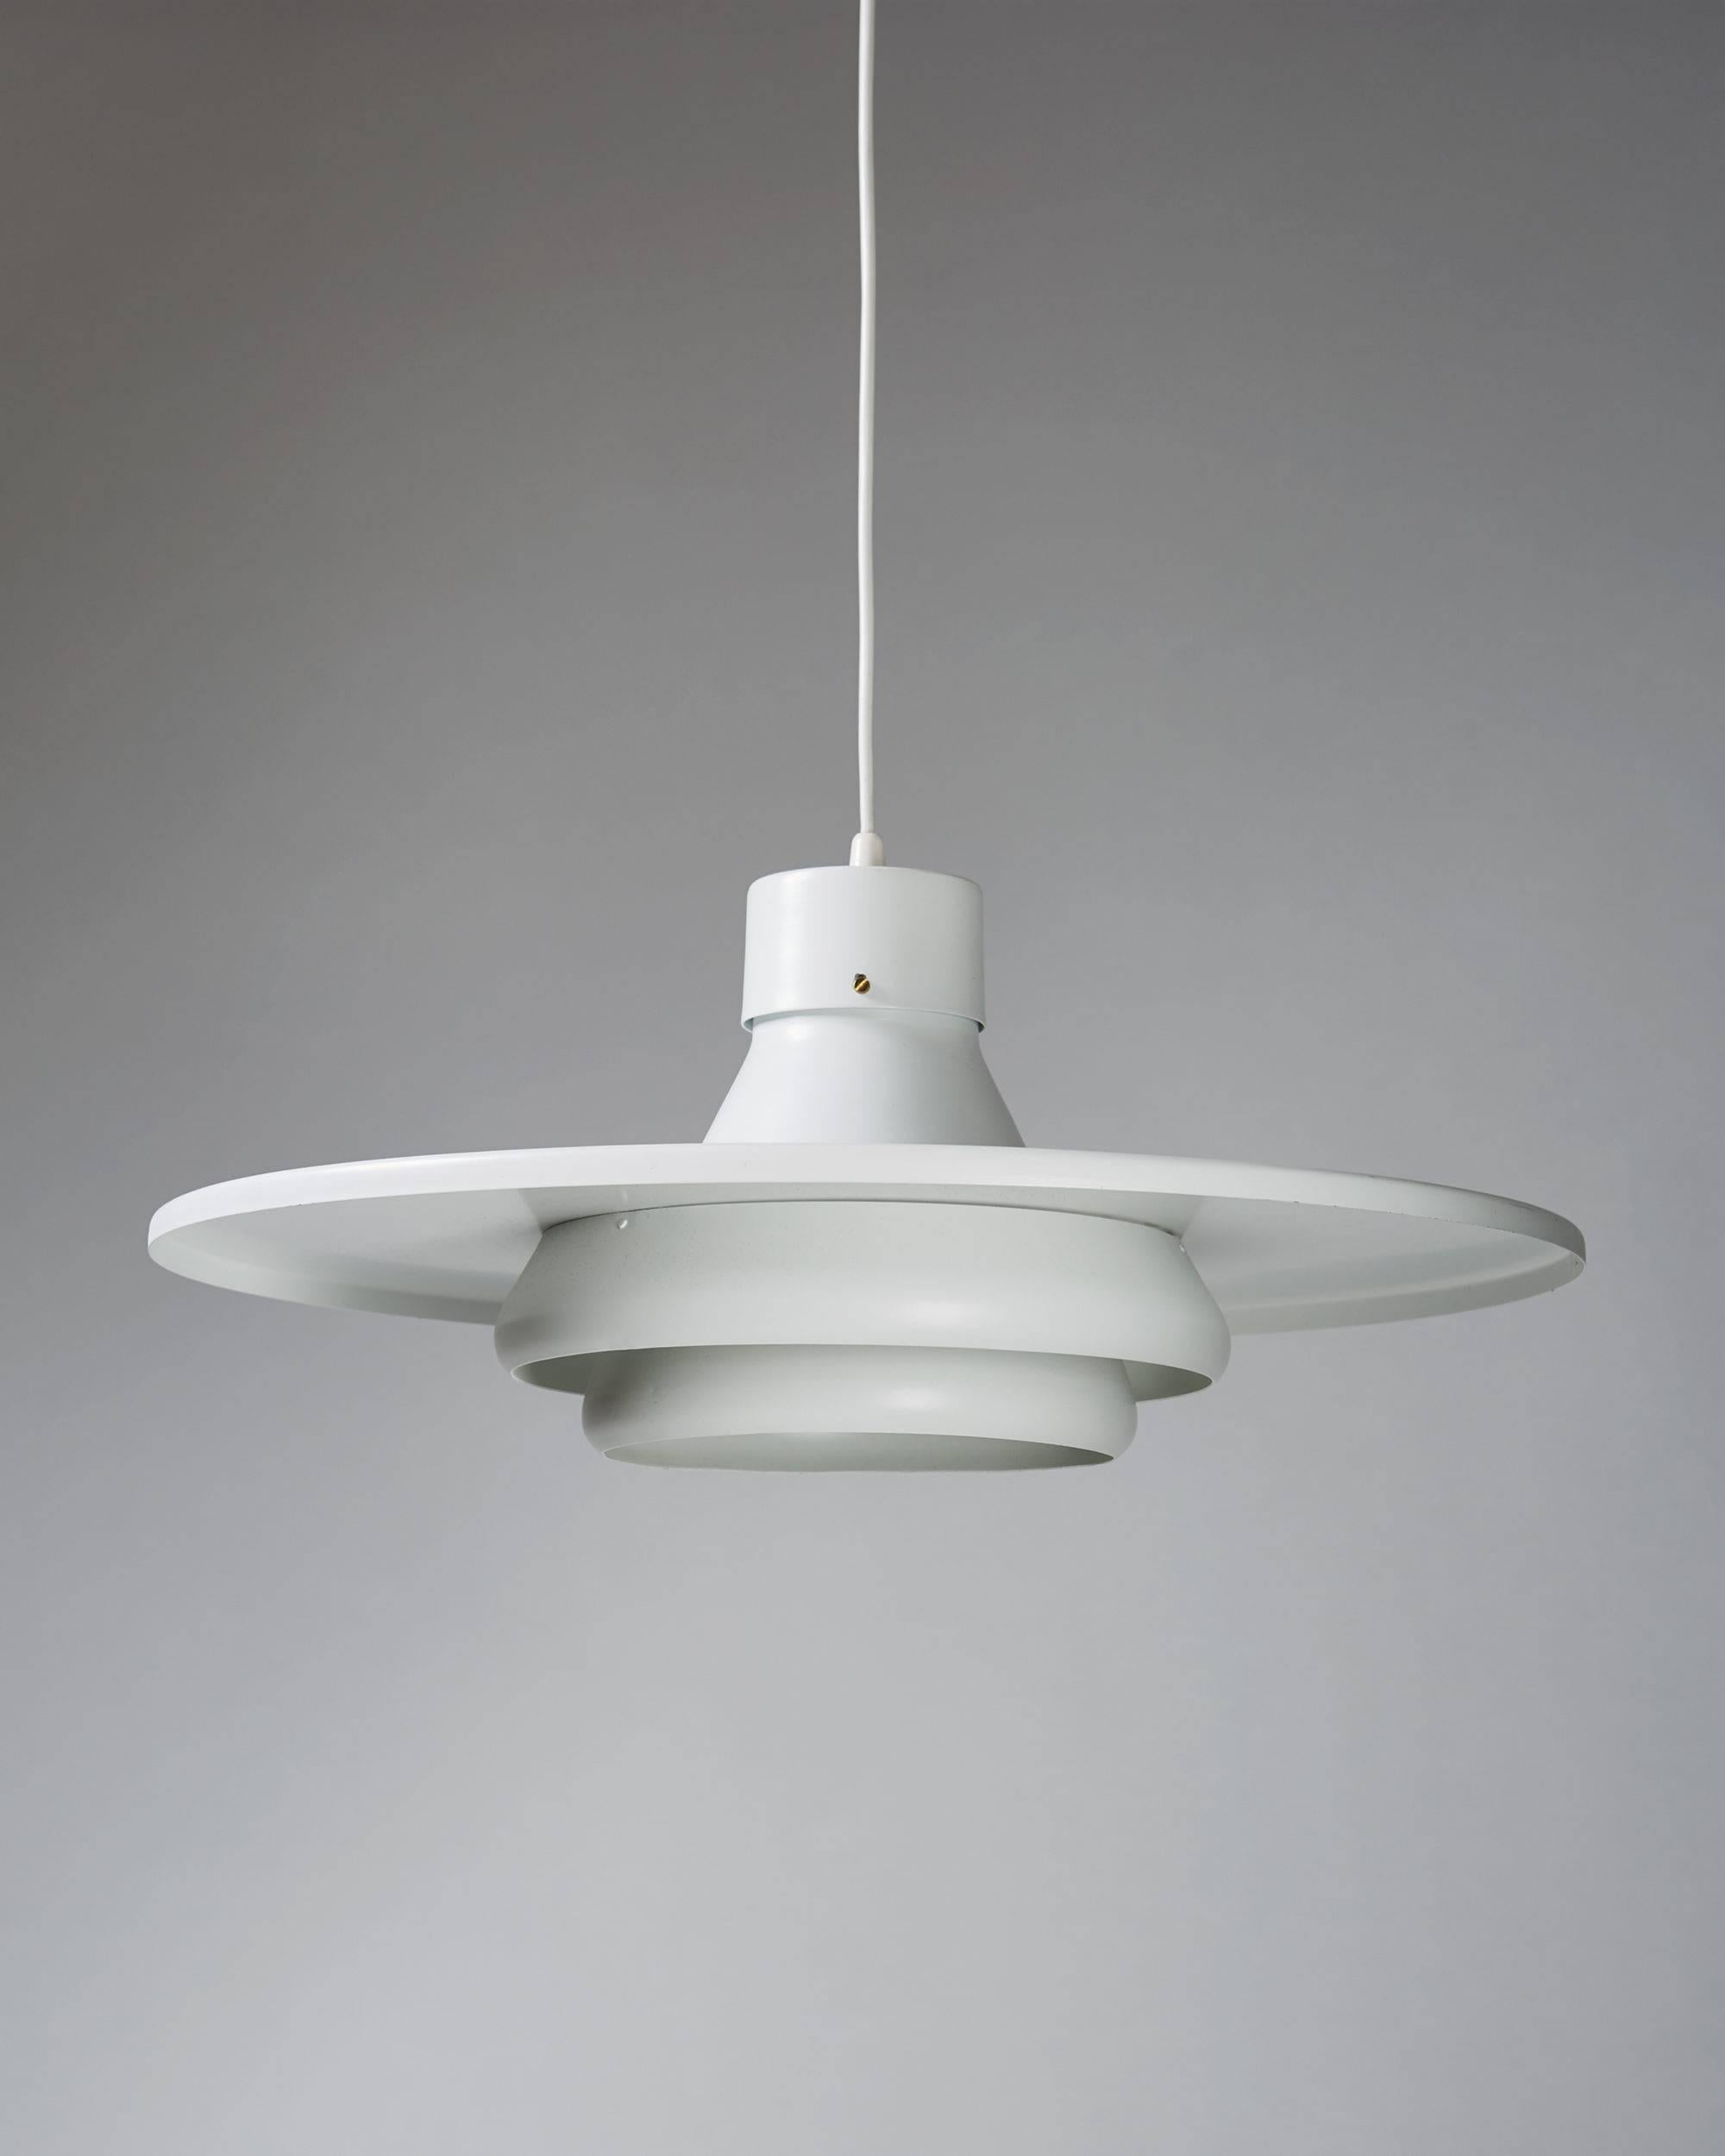 Ceiling light model AP6692, anonymous, for Itsu,
Finland, 1960s.

White lacquered metal.

Measures: H: 24cm/ 9 1/2